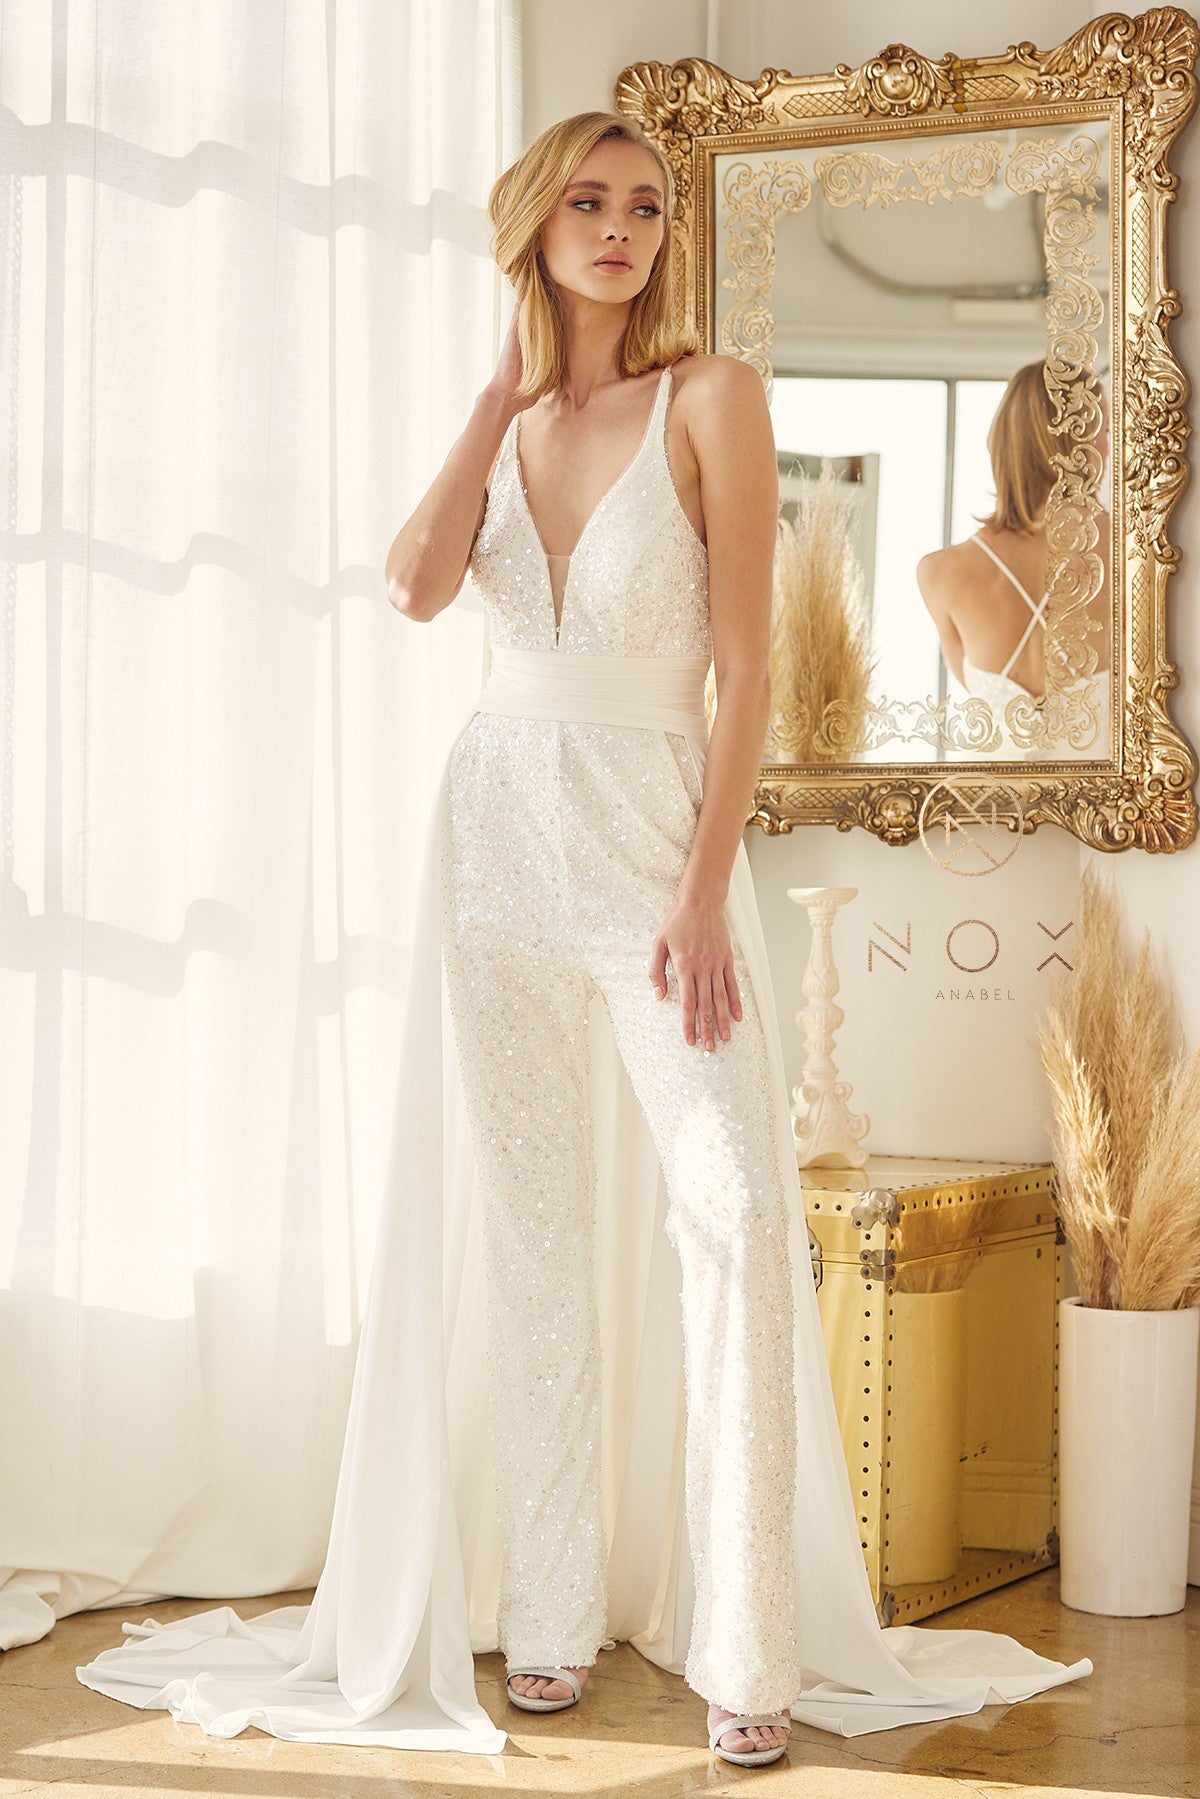 Nox Anabel JE926 Sequin & Pearl Embellished Bridal V Neck Jumpsuit with detachable  Overskirt. Pockets in the pant legs. This Wedding Pant suit has a PLUNGING NECKLINE WITH BEADING DETAILS IN JUMPSUIT WITH A CAPE FROM WAIST. Great for receptions!  Available Sizes: 2-16  Available Colors: White